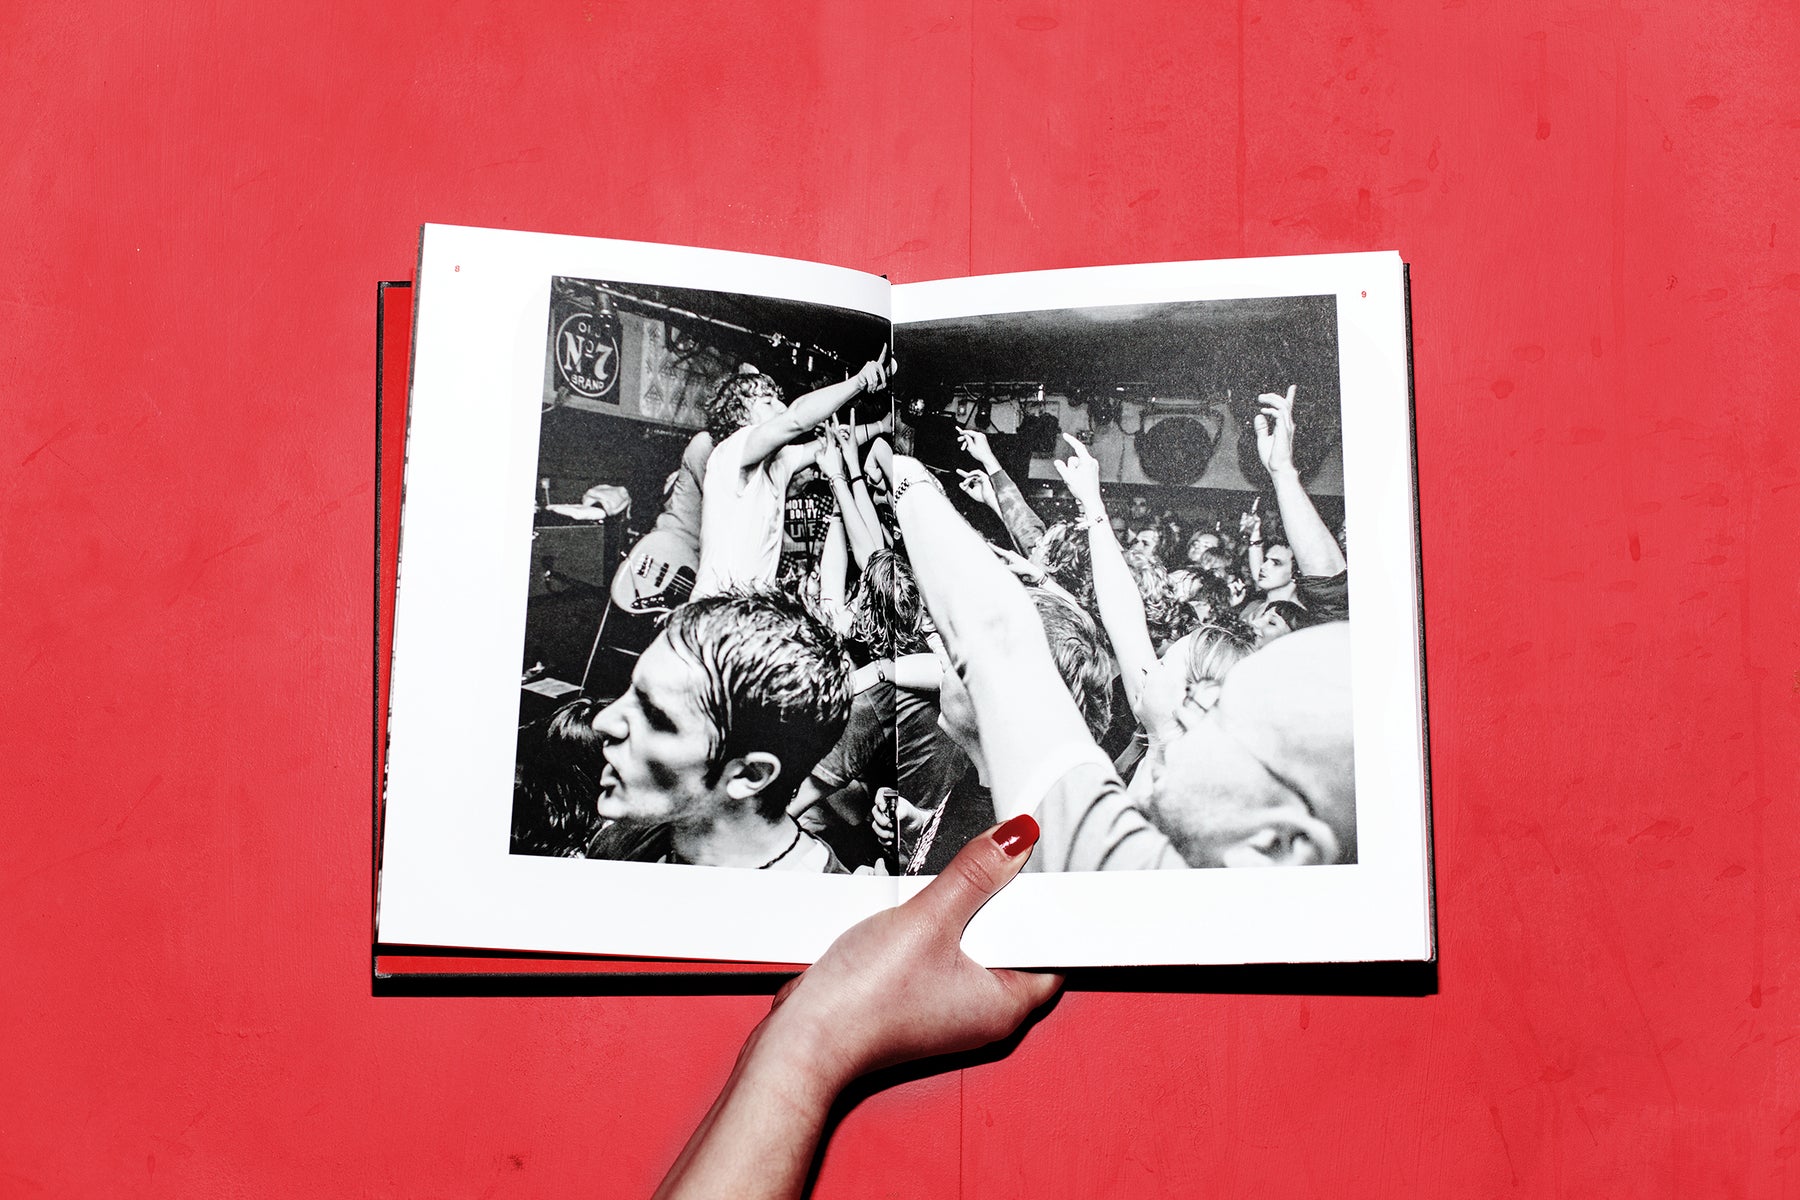 25 Years of Molotow Book